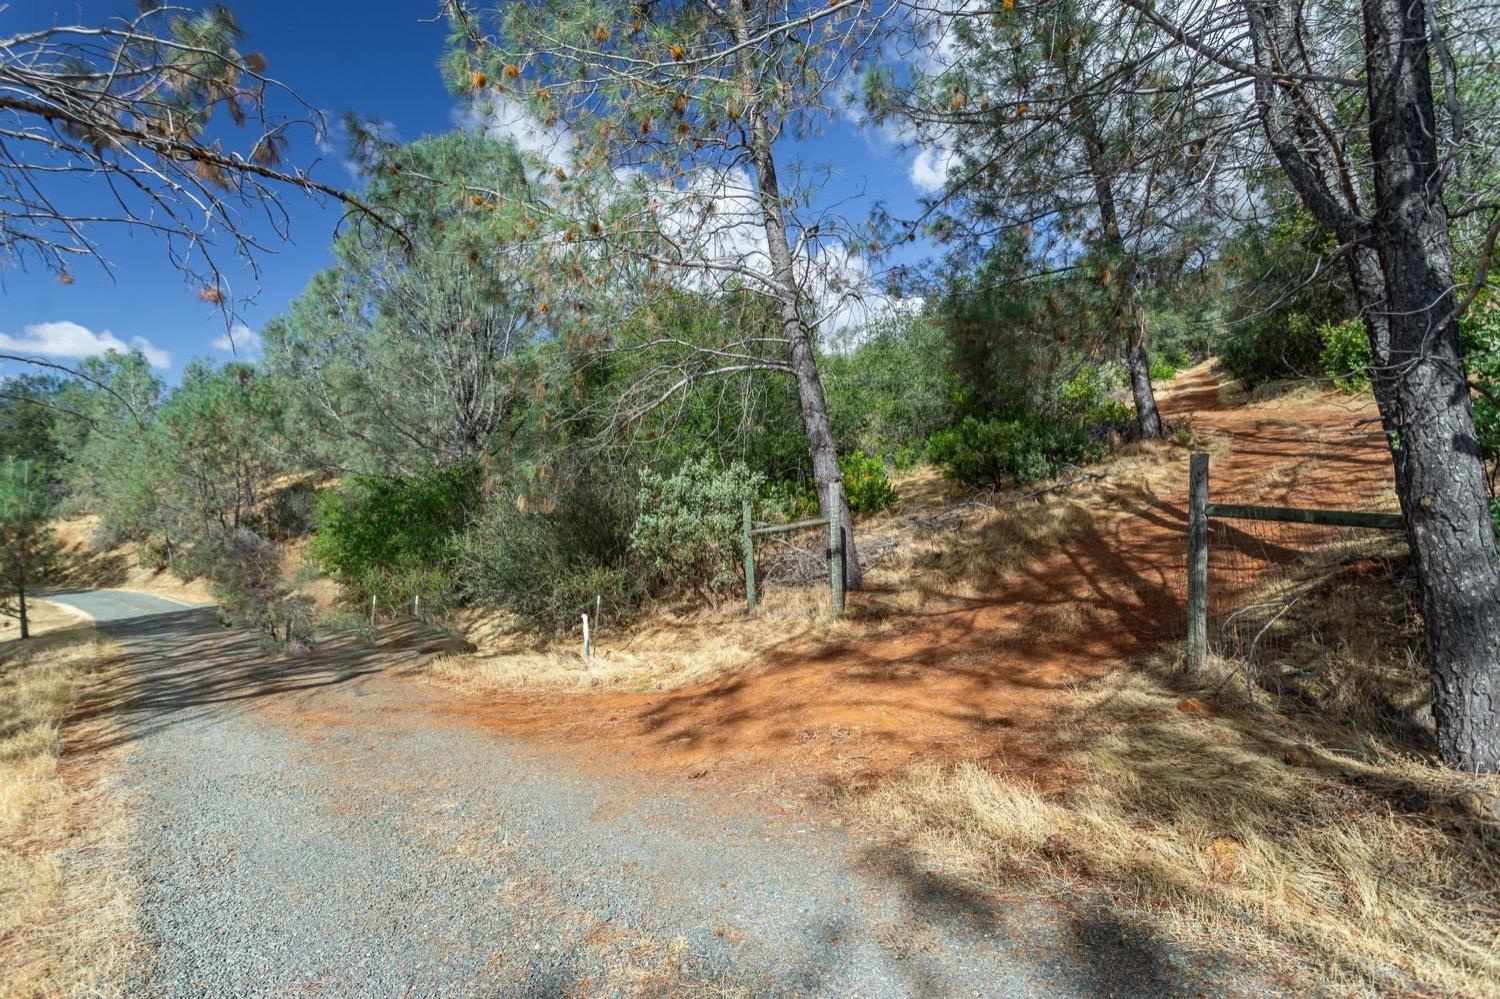 Photo of 21088 Dalzell Rd in Smartsville, CA